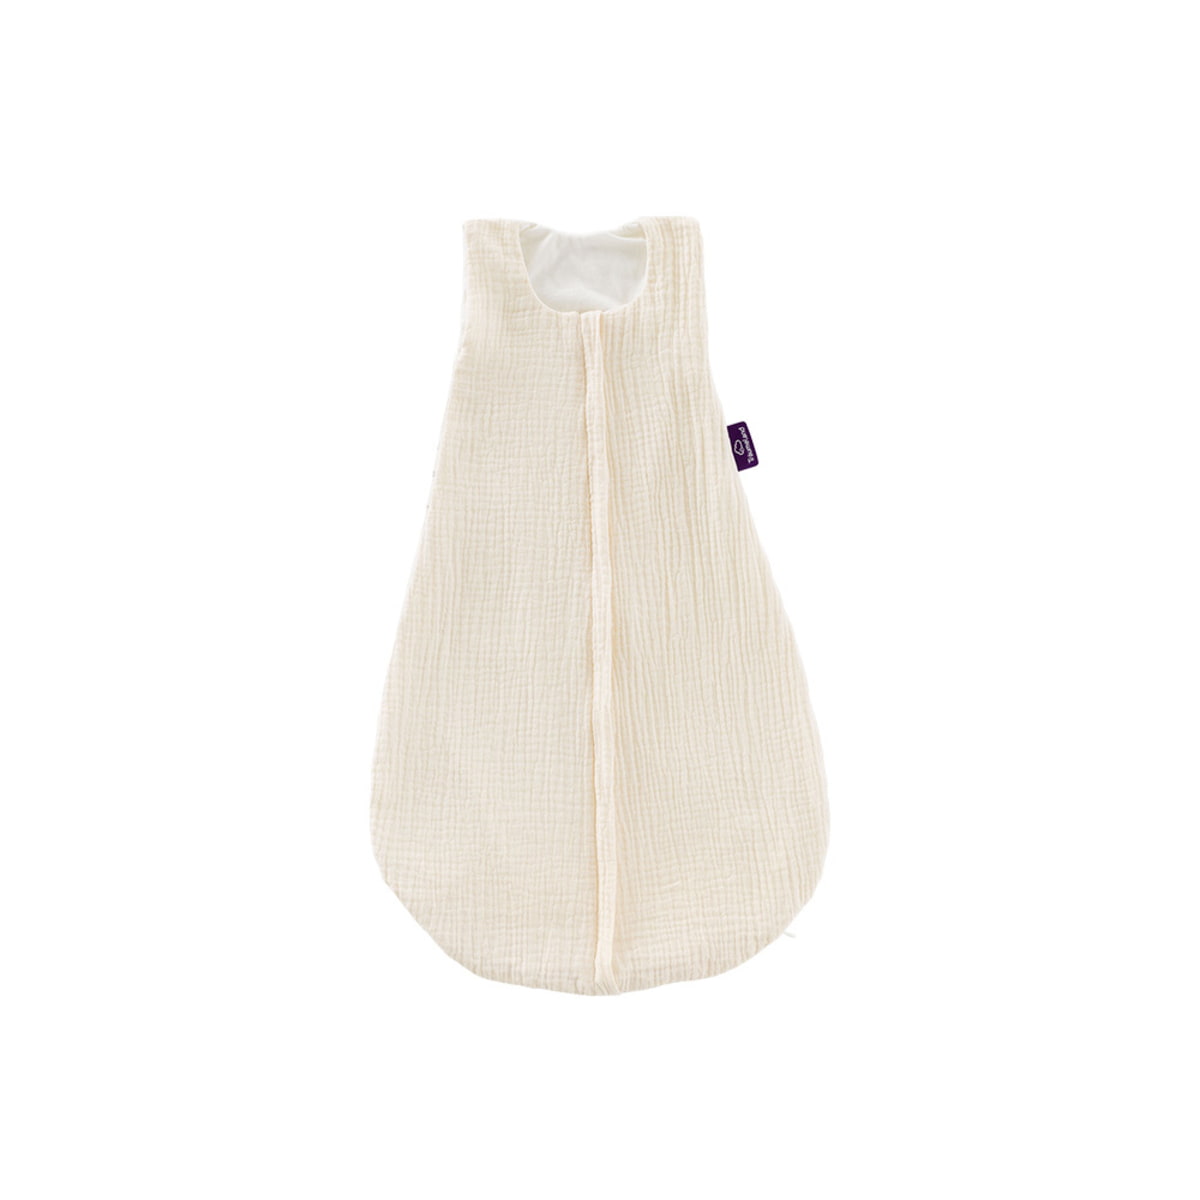 summer sleeping bag made out of cotton muslin in beige